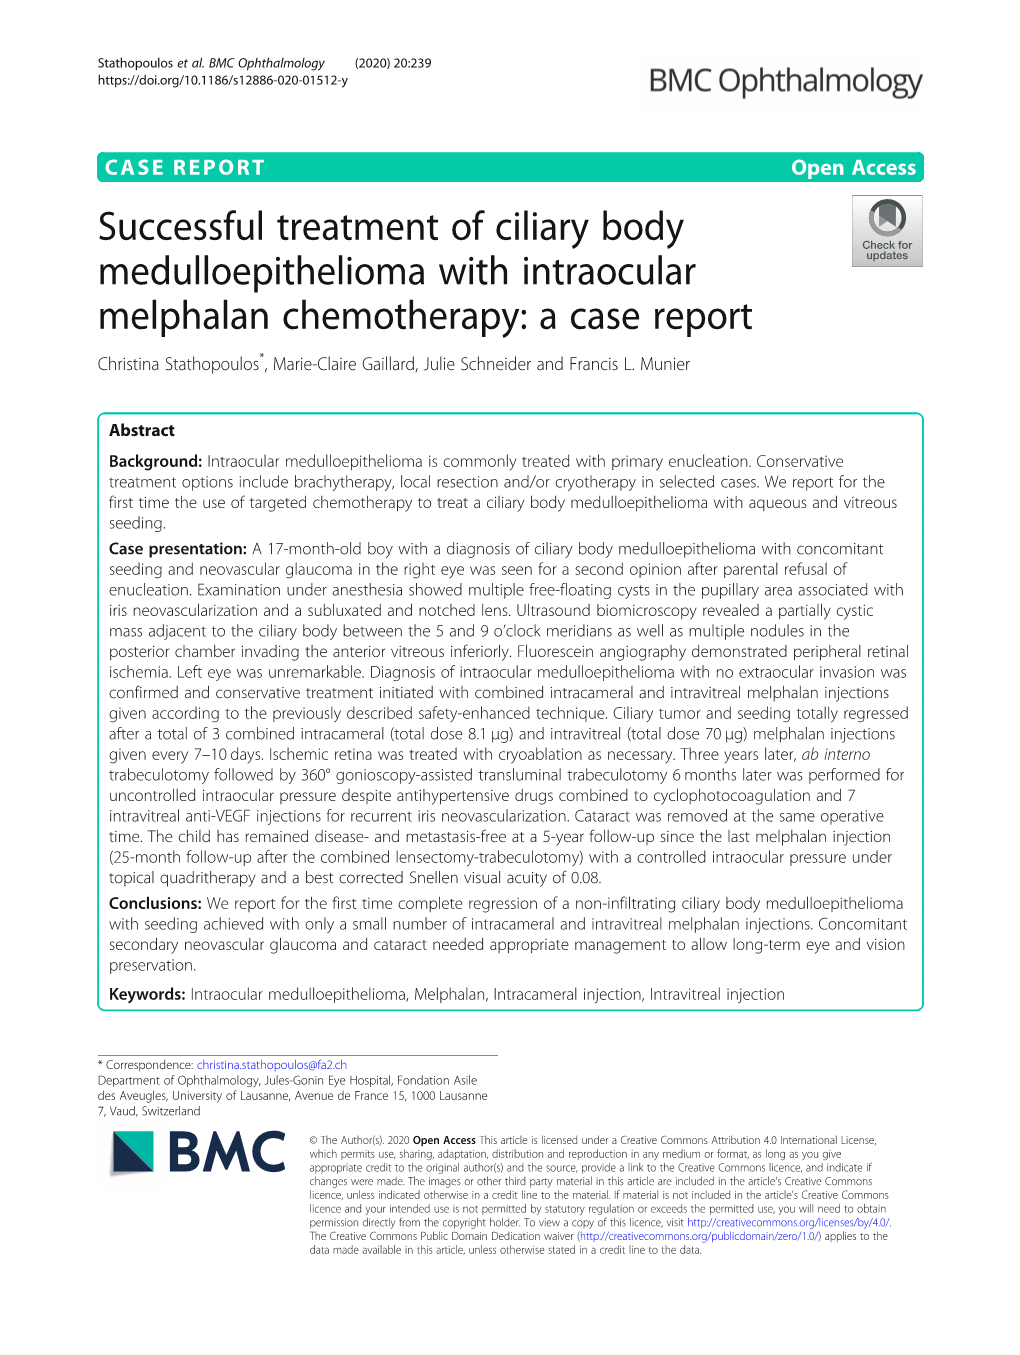 Successful Treatment of Ciliary Body Medulloepithelioma with Intraocular